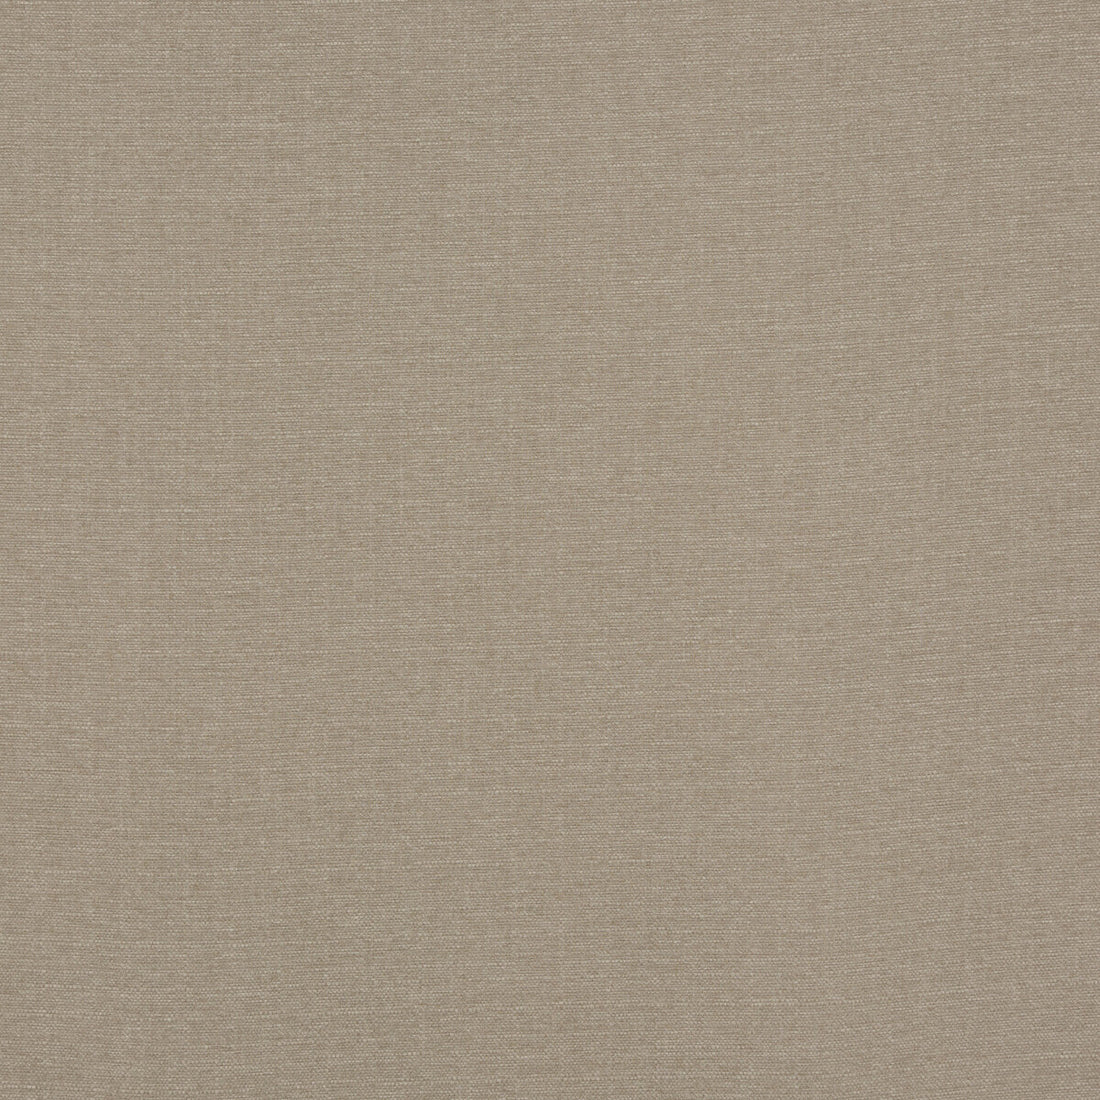 Lansdowne fabric in taupe color - pattern PF50413.210.0 - by Baker Lifestyle in the Notebooks collection